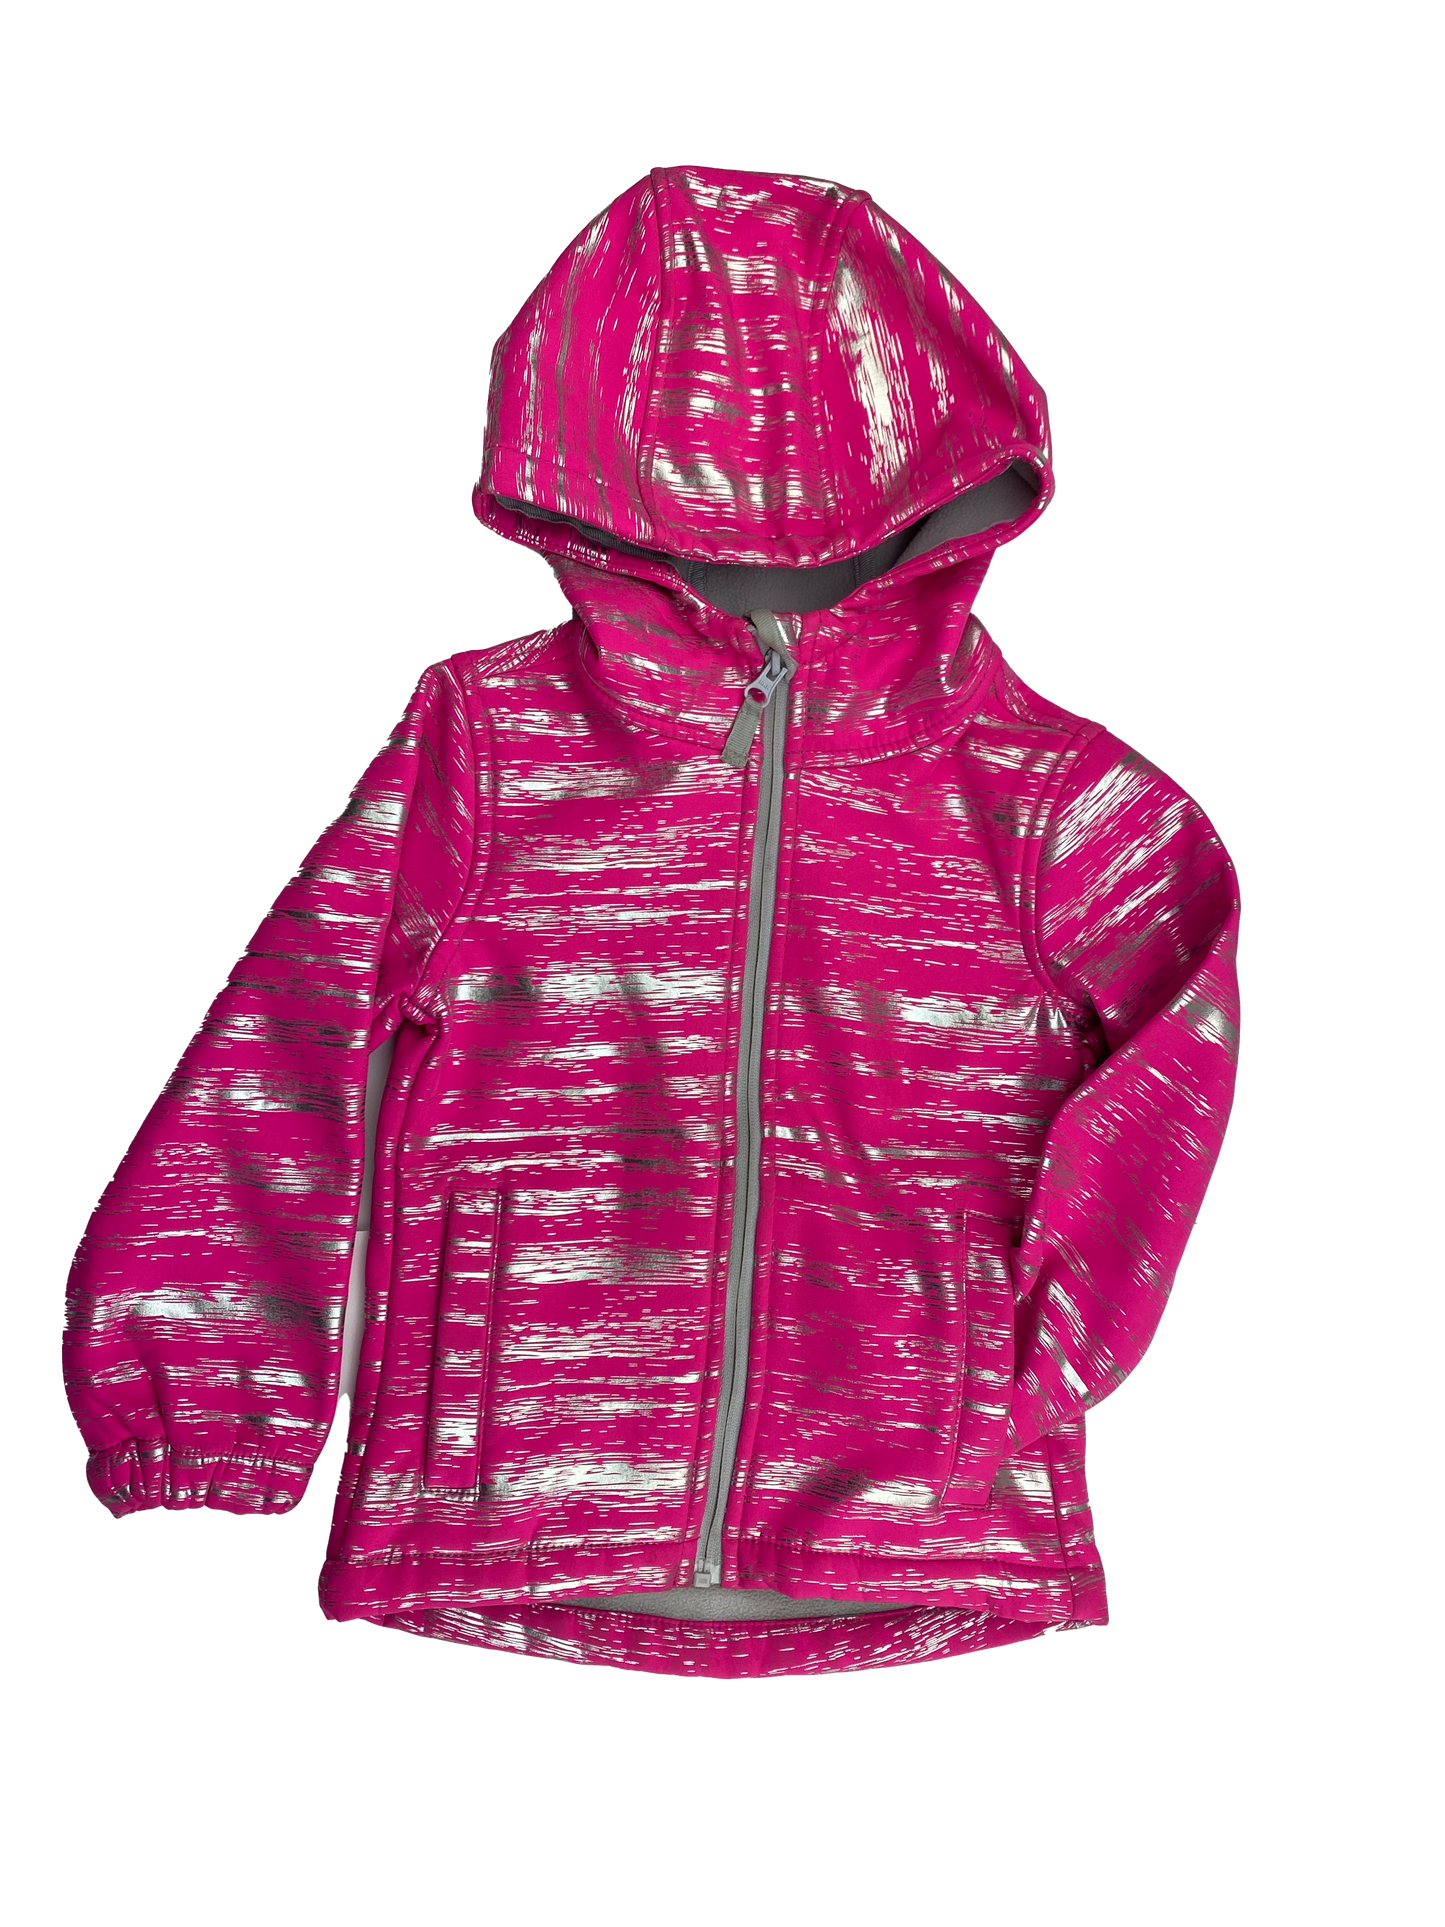 Athletic Works Pink & Silver Hooded Lightweight Jacket 4